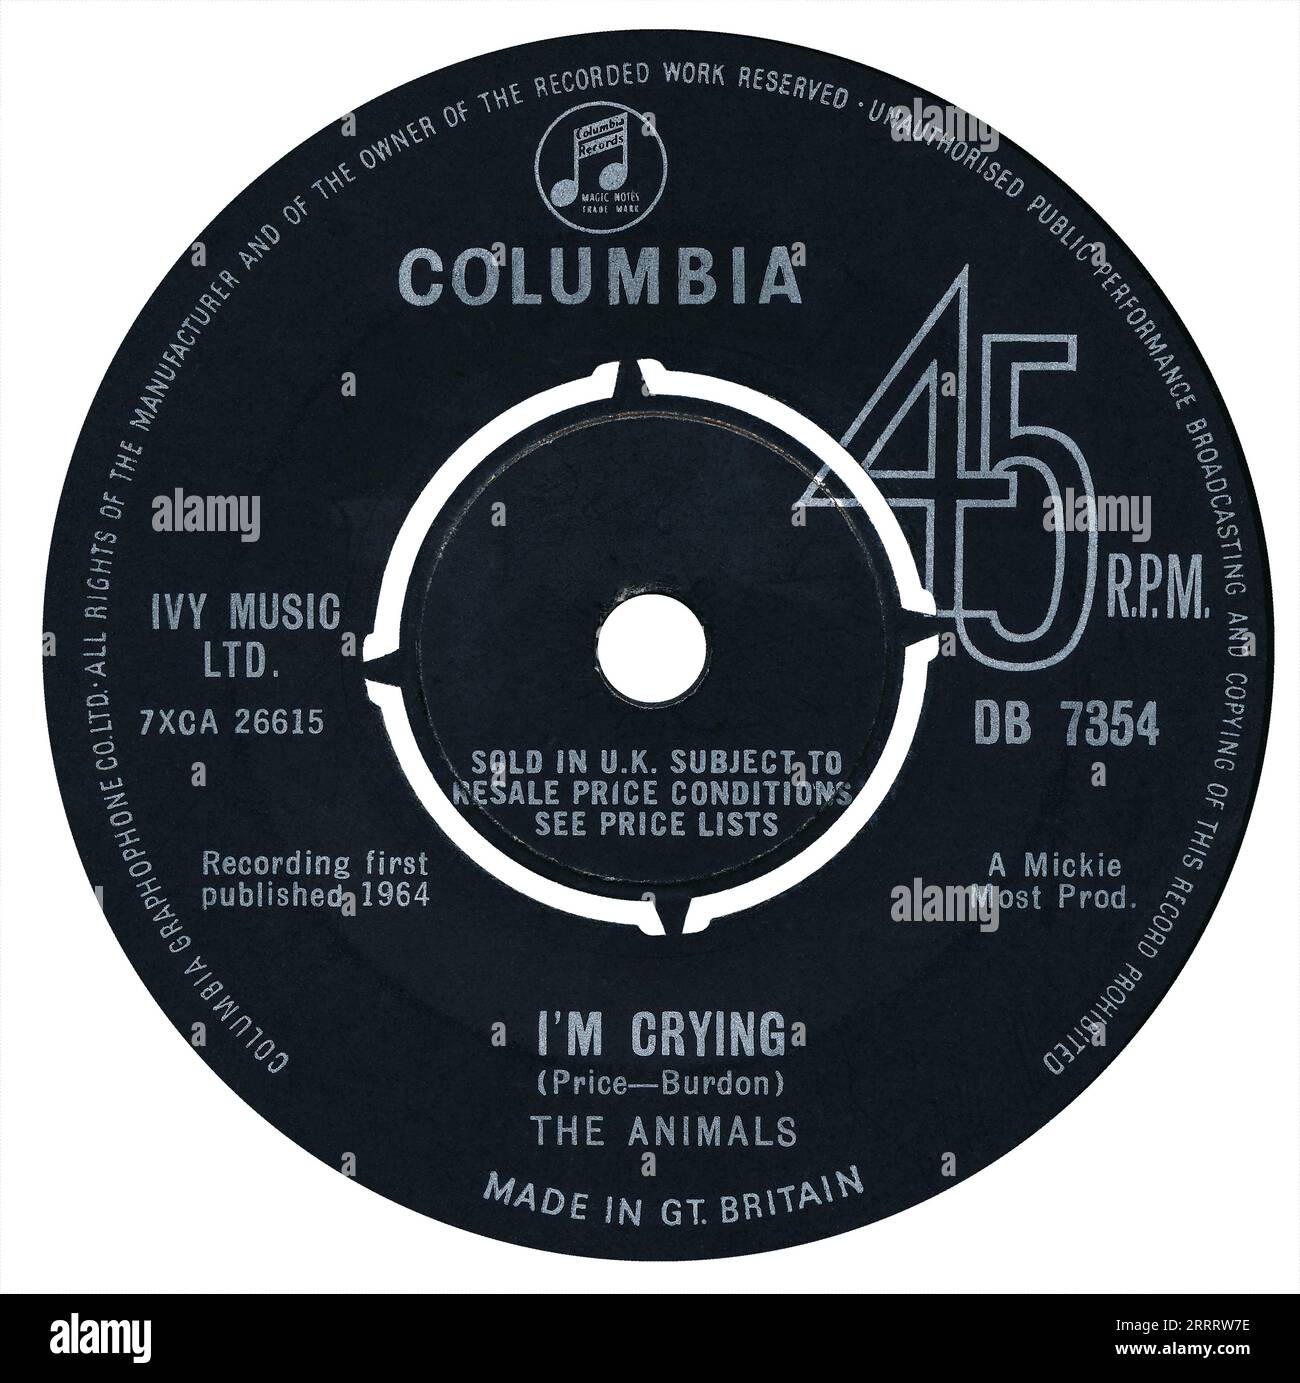 45 RPM 7" UK record label of I'm Crying by The Animals on the Columbia label from 1964. Written by Alan Price and Eric Burdon and produced by Mickie Most. Stock Photo